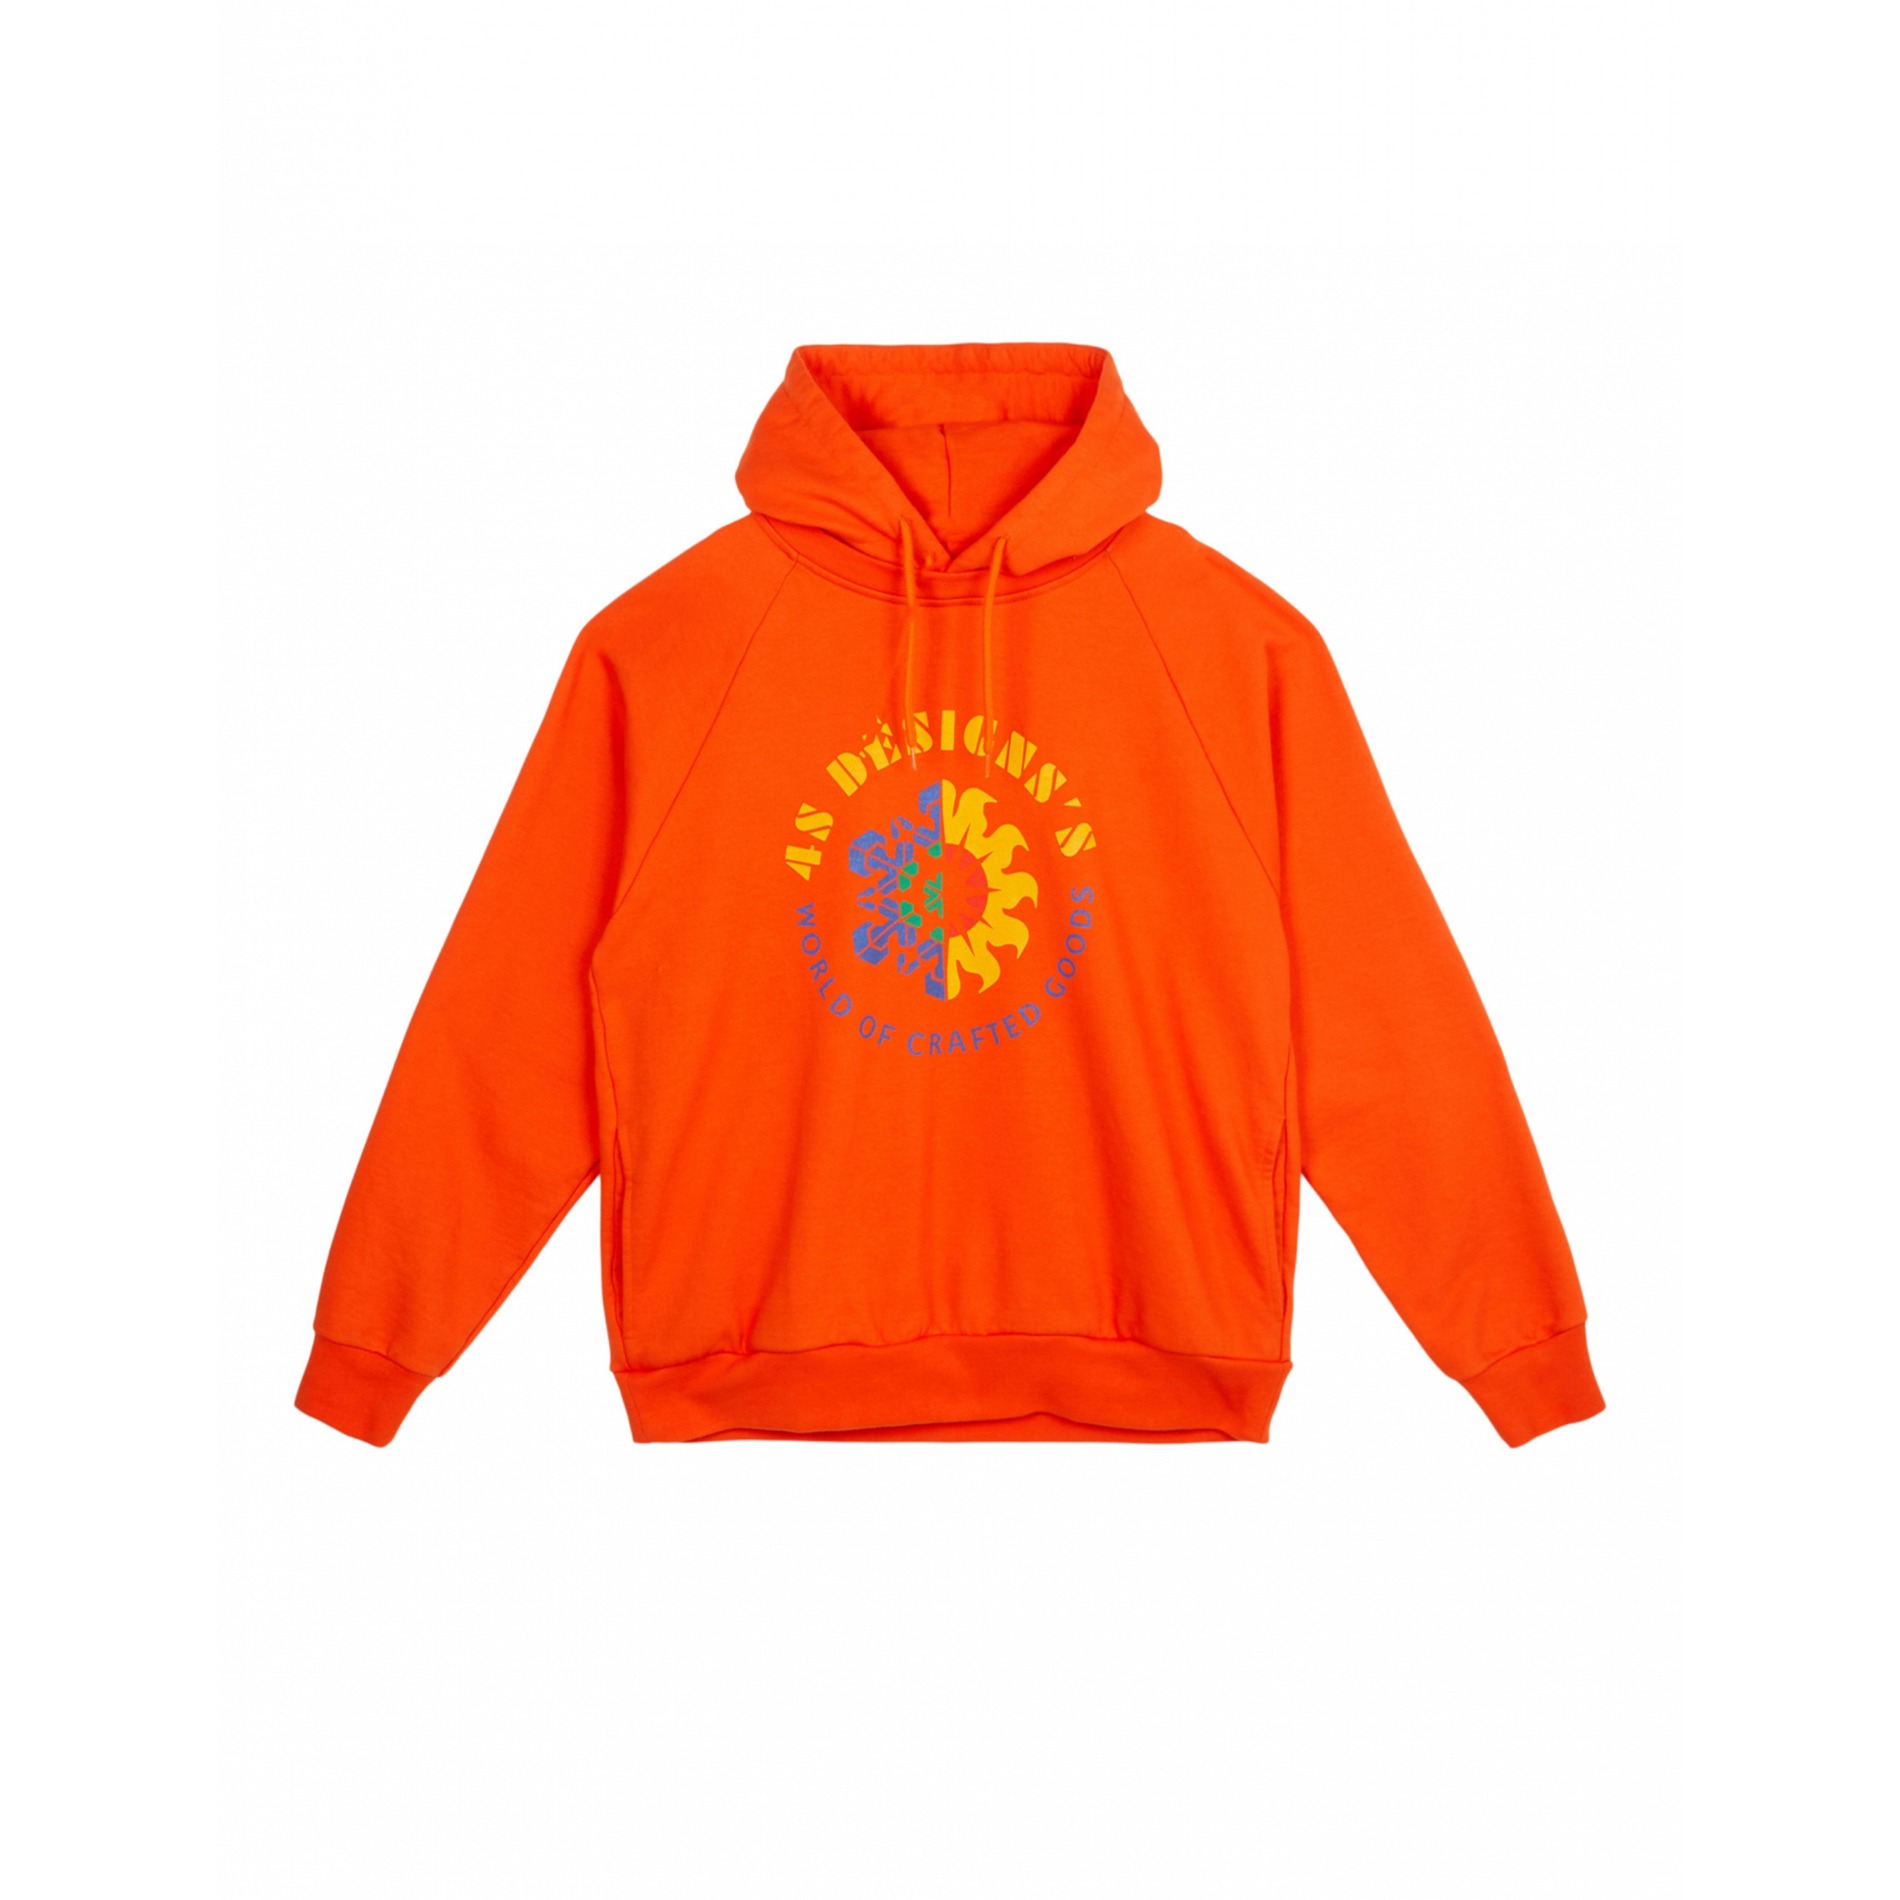 SS22 4SDESIGNS HOODIE IN ORANGE FRENCH TERRY